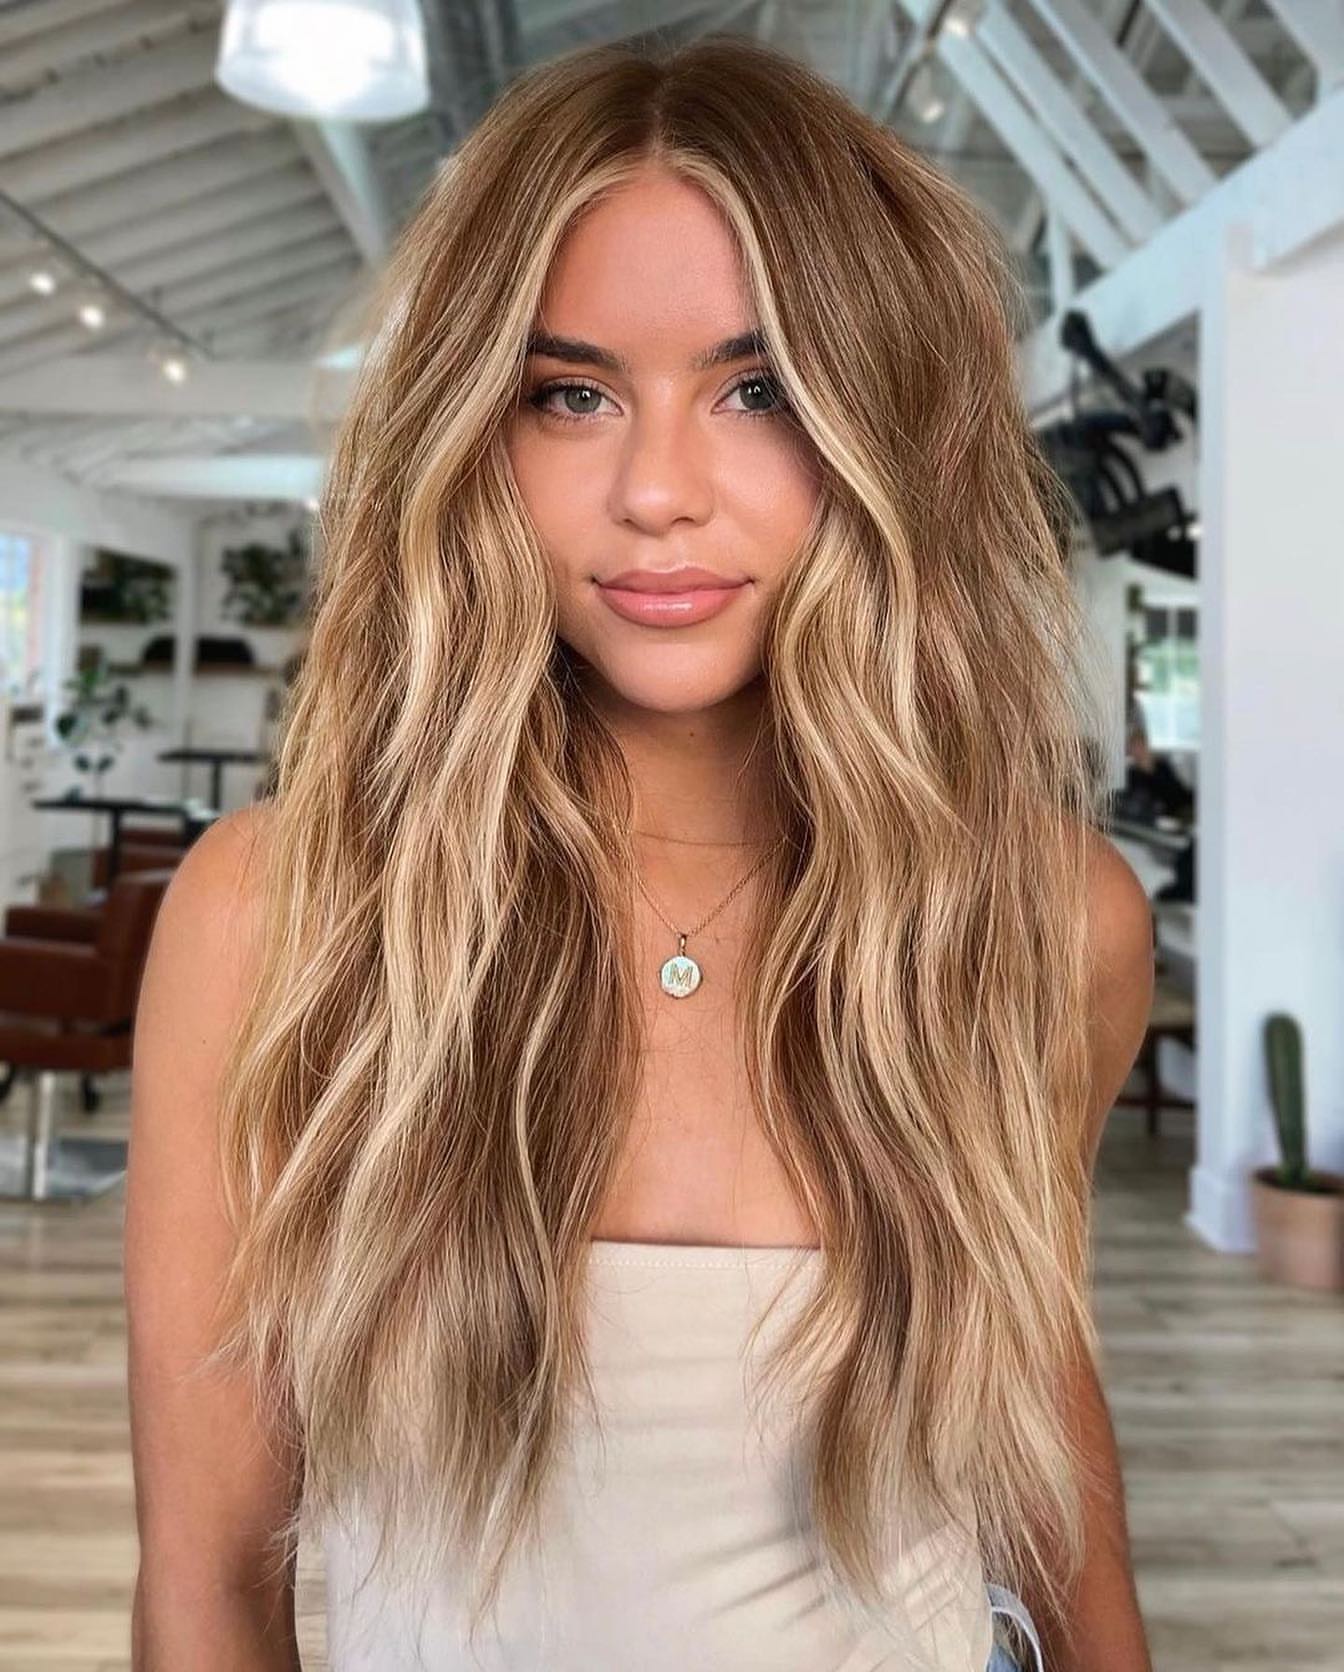 31 Best Long Haircuts and Hairstyles of 2021 - Long Hair Ideas | Allure